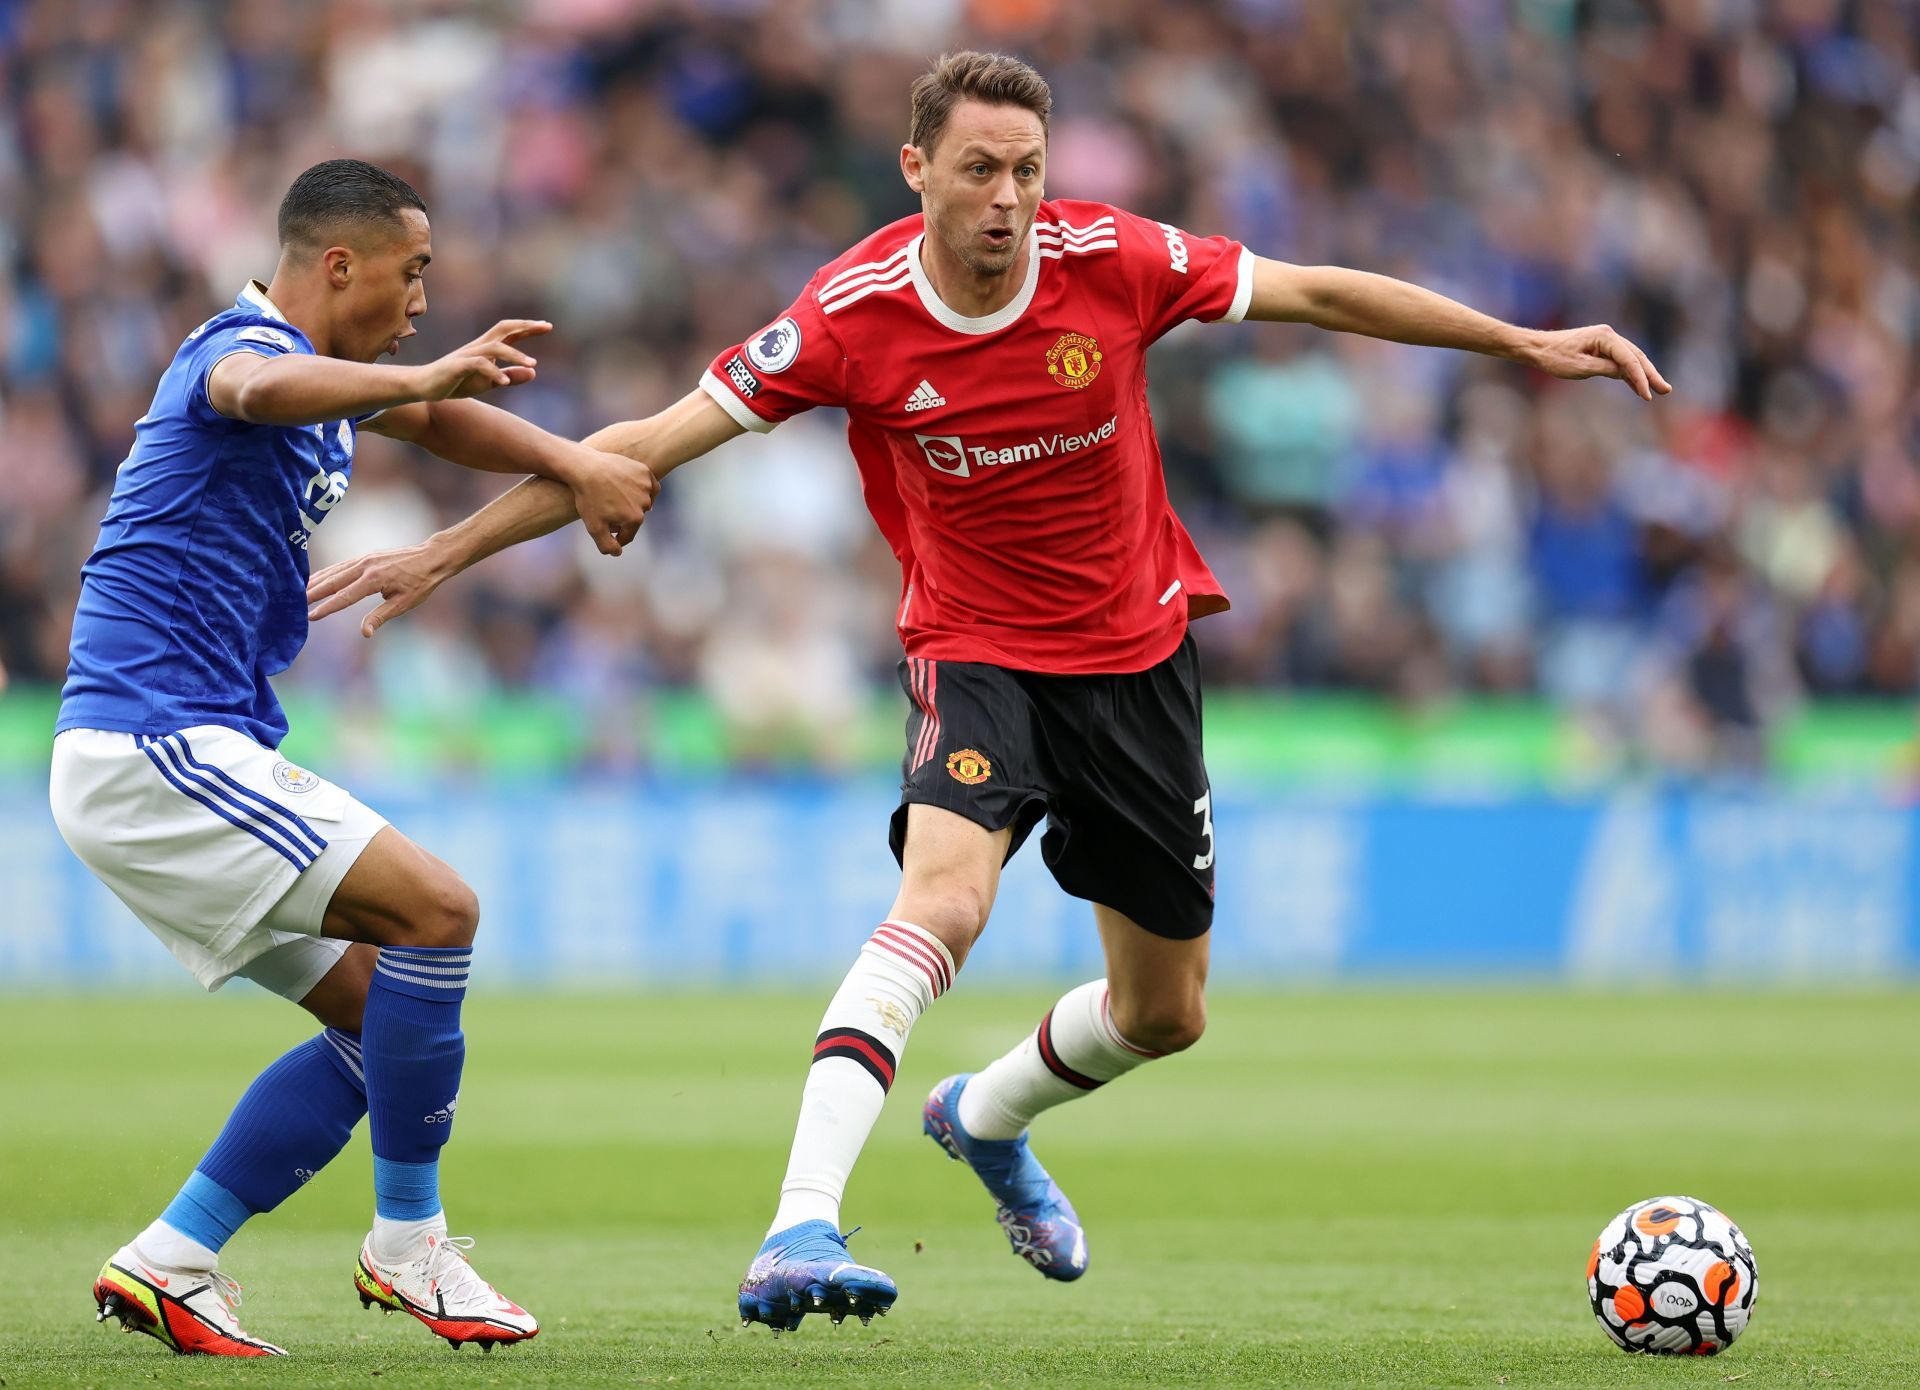 Nemanja Matic is adamant Manchester United are still in the race for the Premier League title.